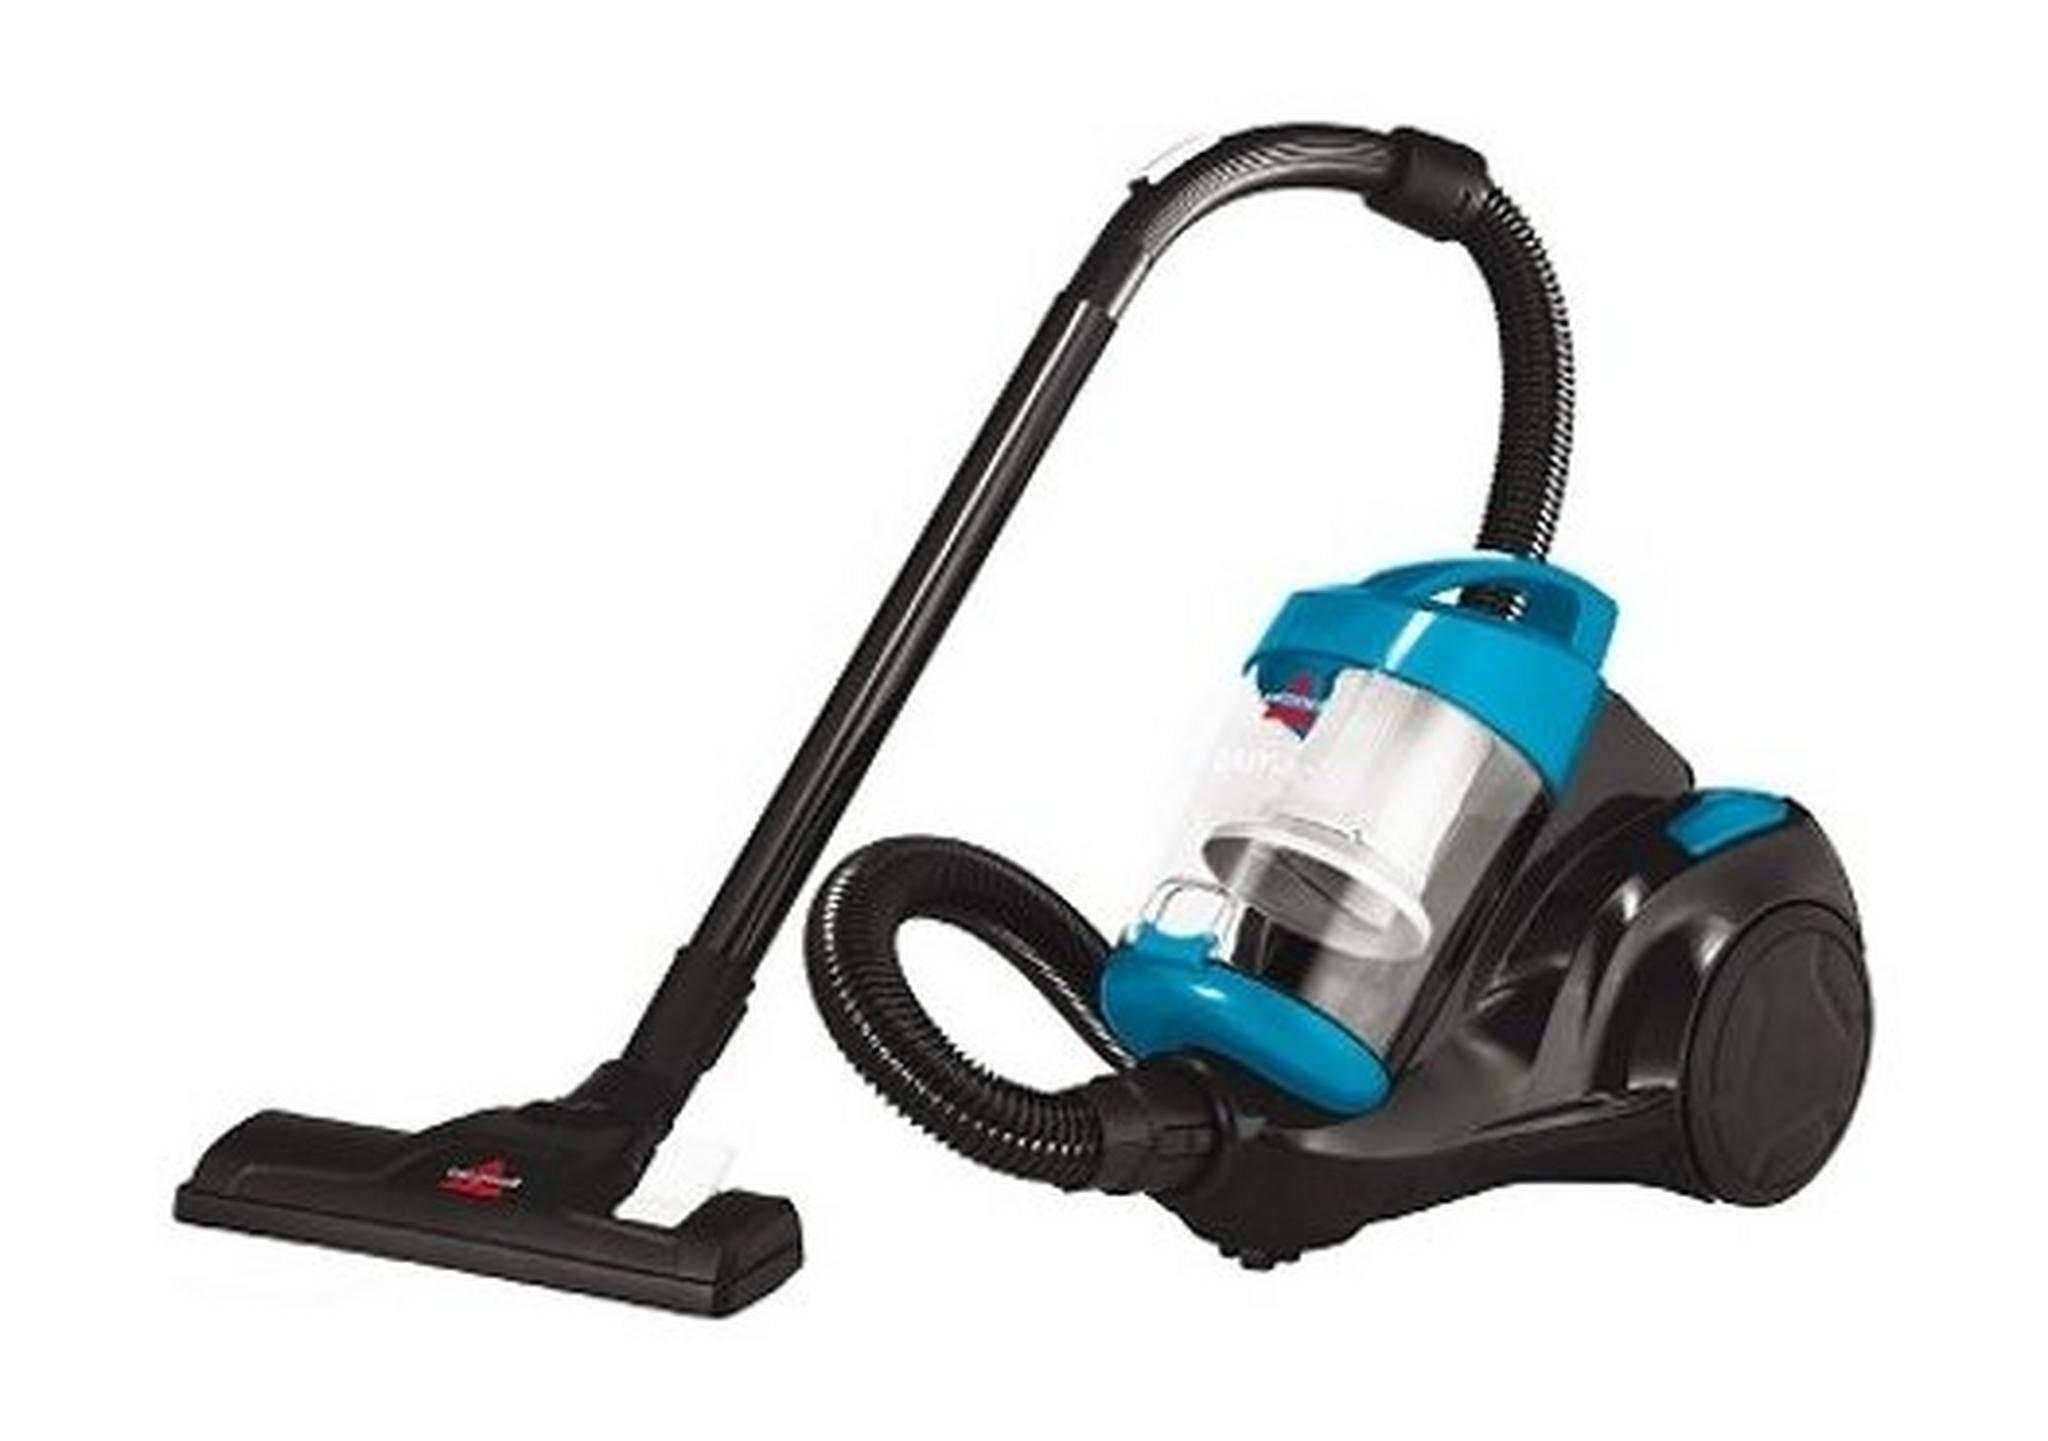 Bissell Zing Bagless Canister Vacuum Cleaner,1500W,2.5 Liters, 2155E - Black